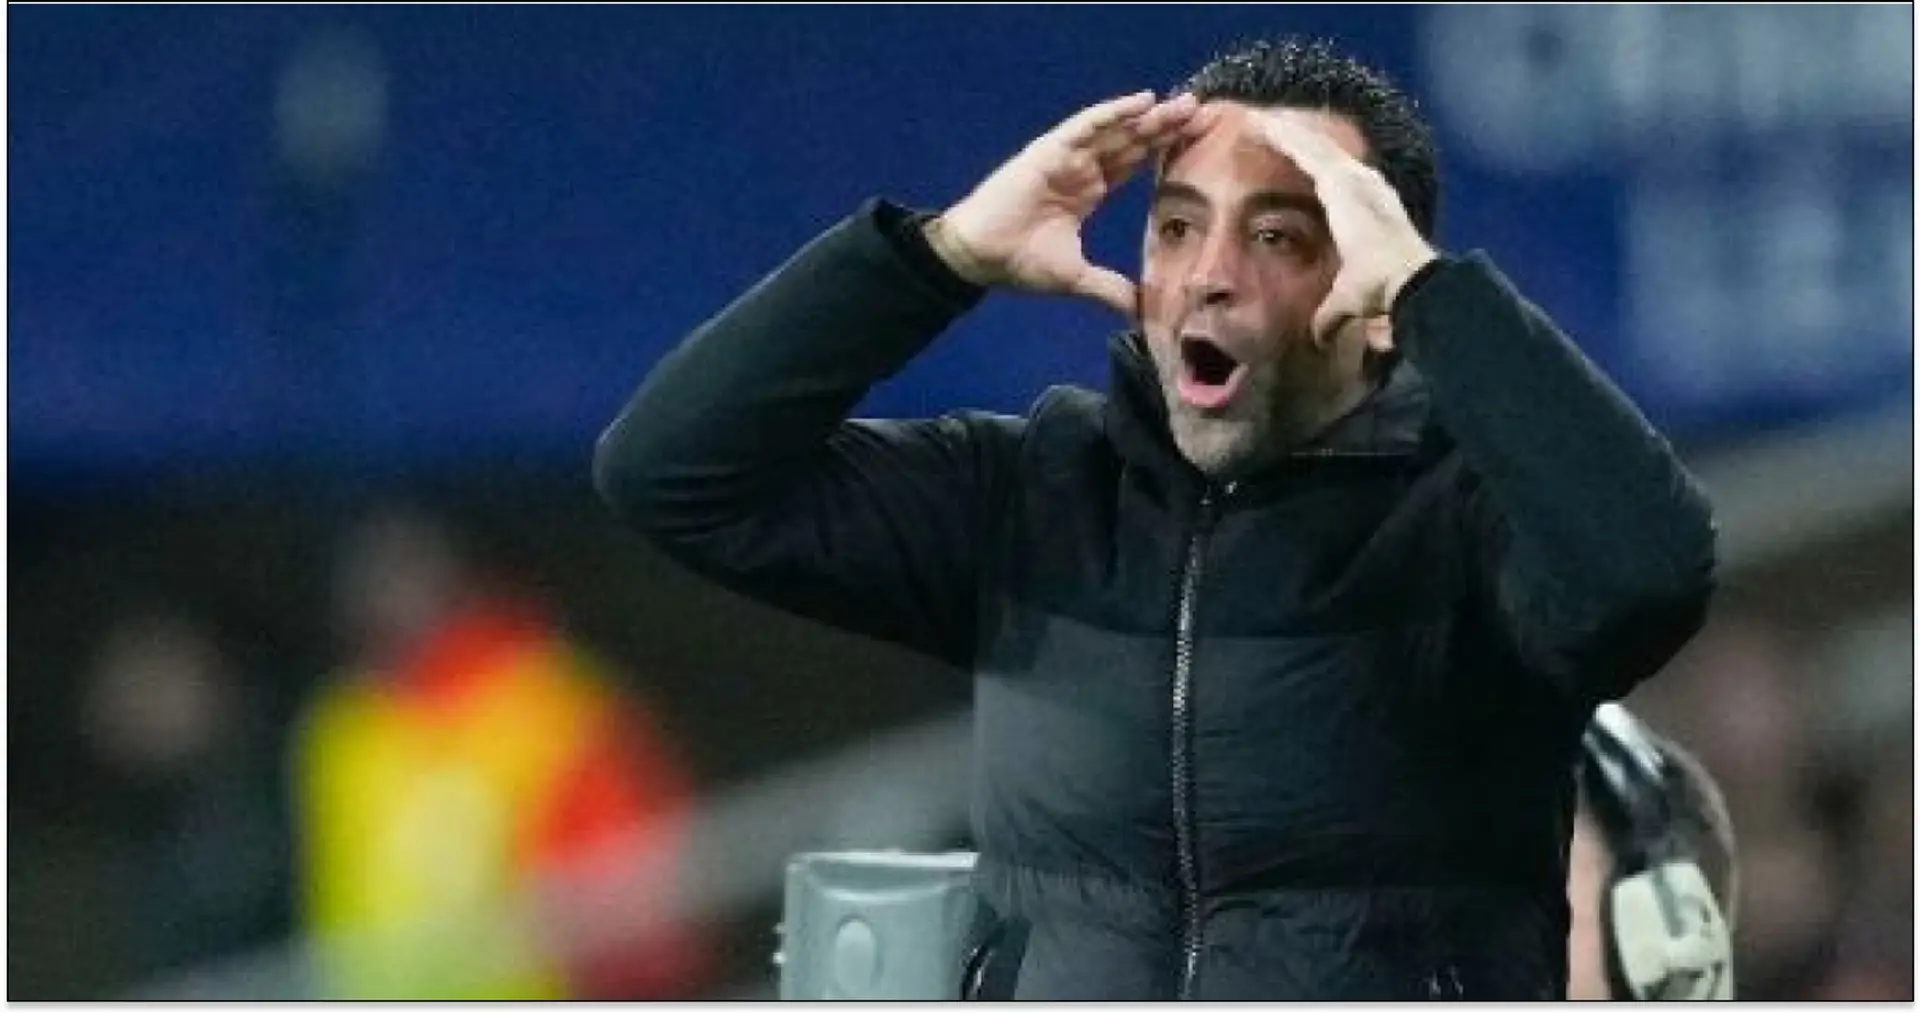 'Criminal': Fan slams Xavi for 'reducing' one player to 'mere spectator'